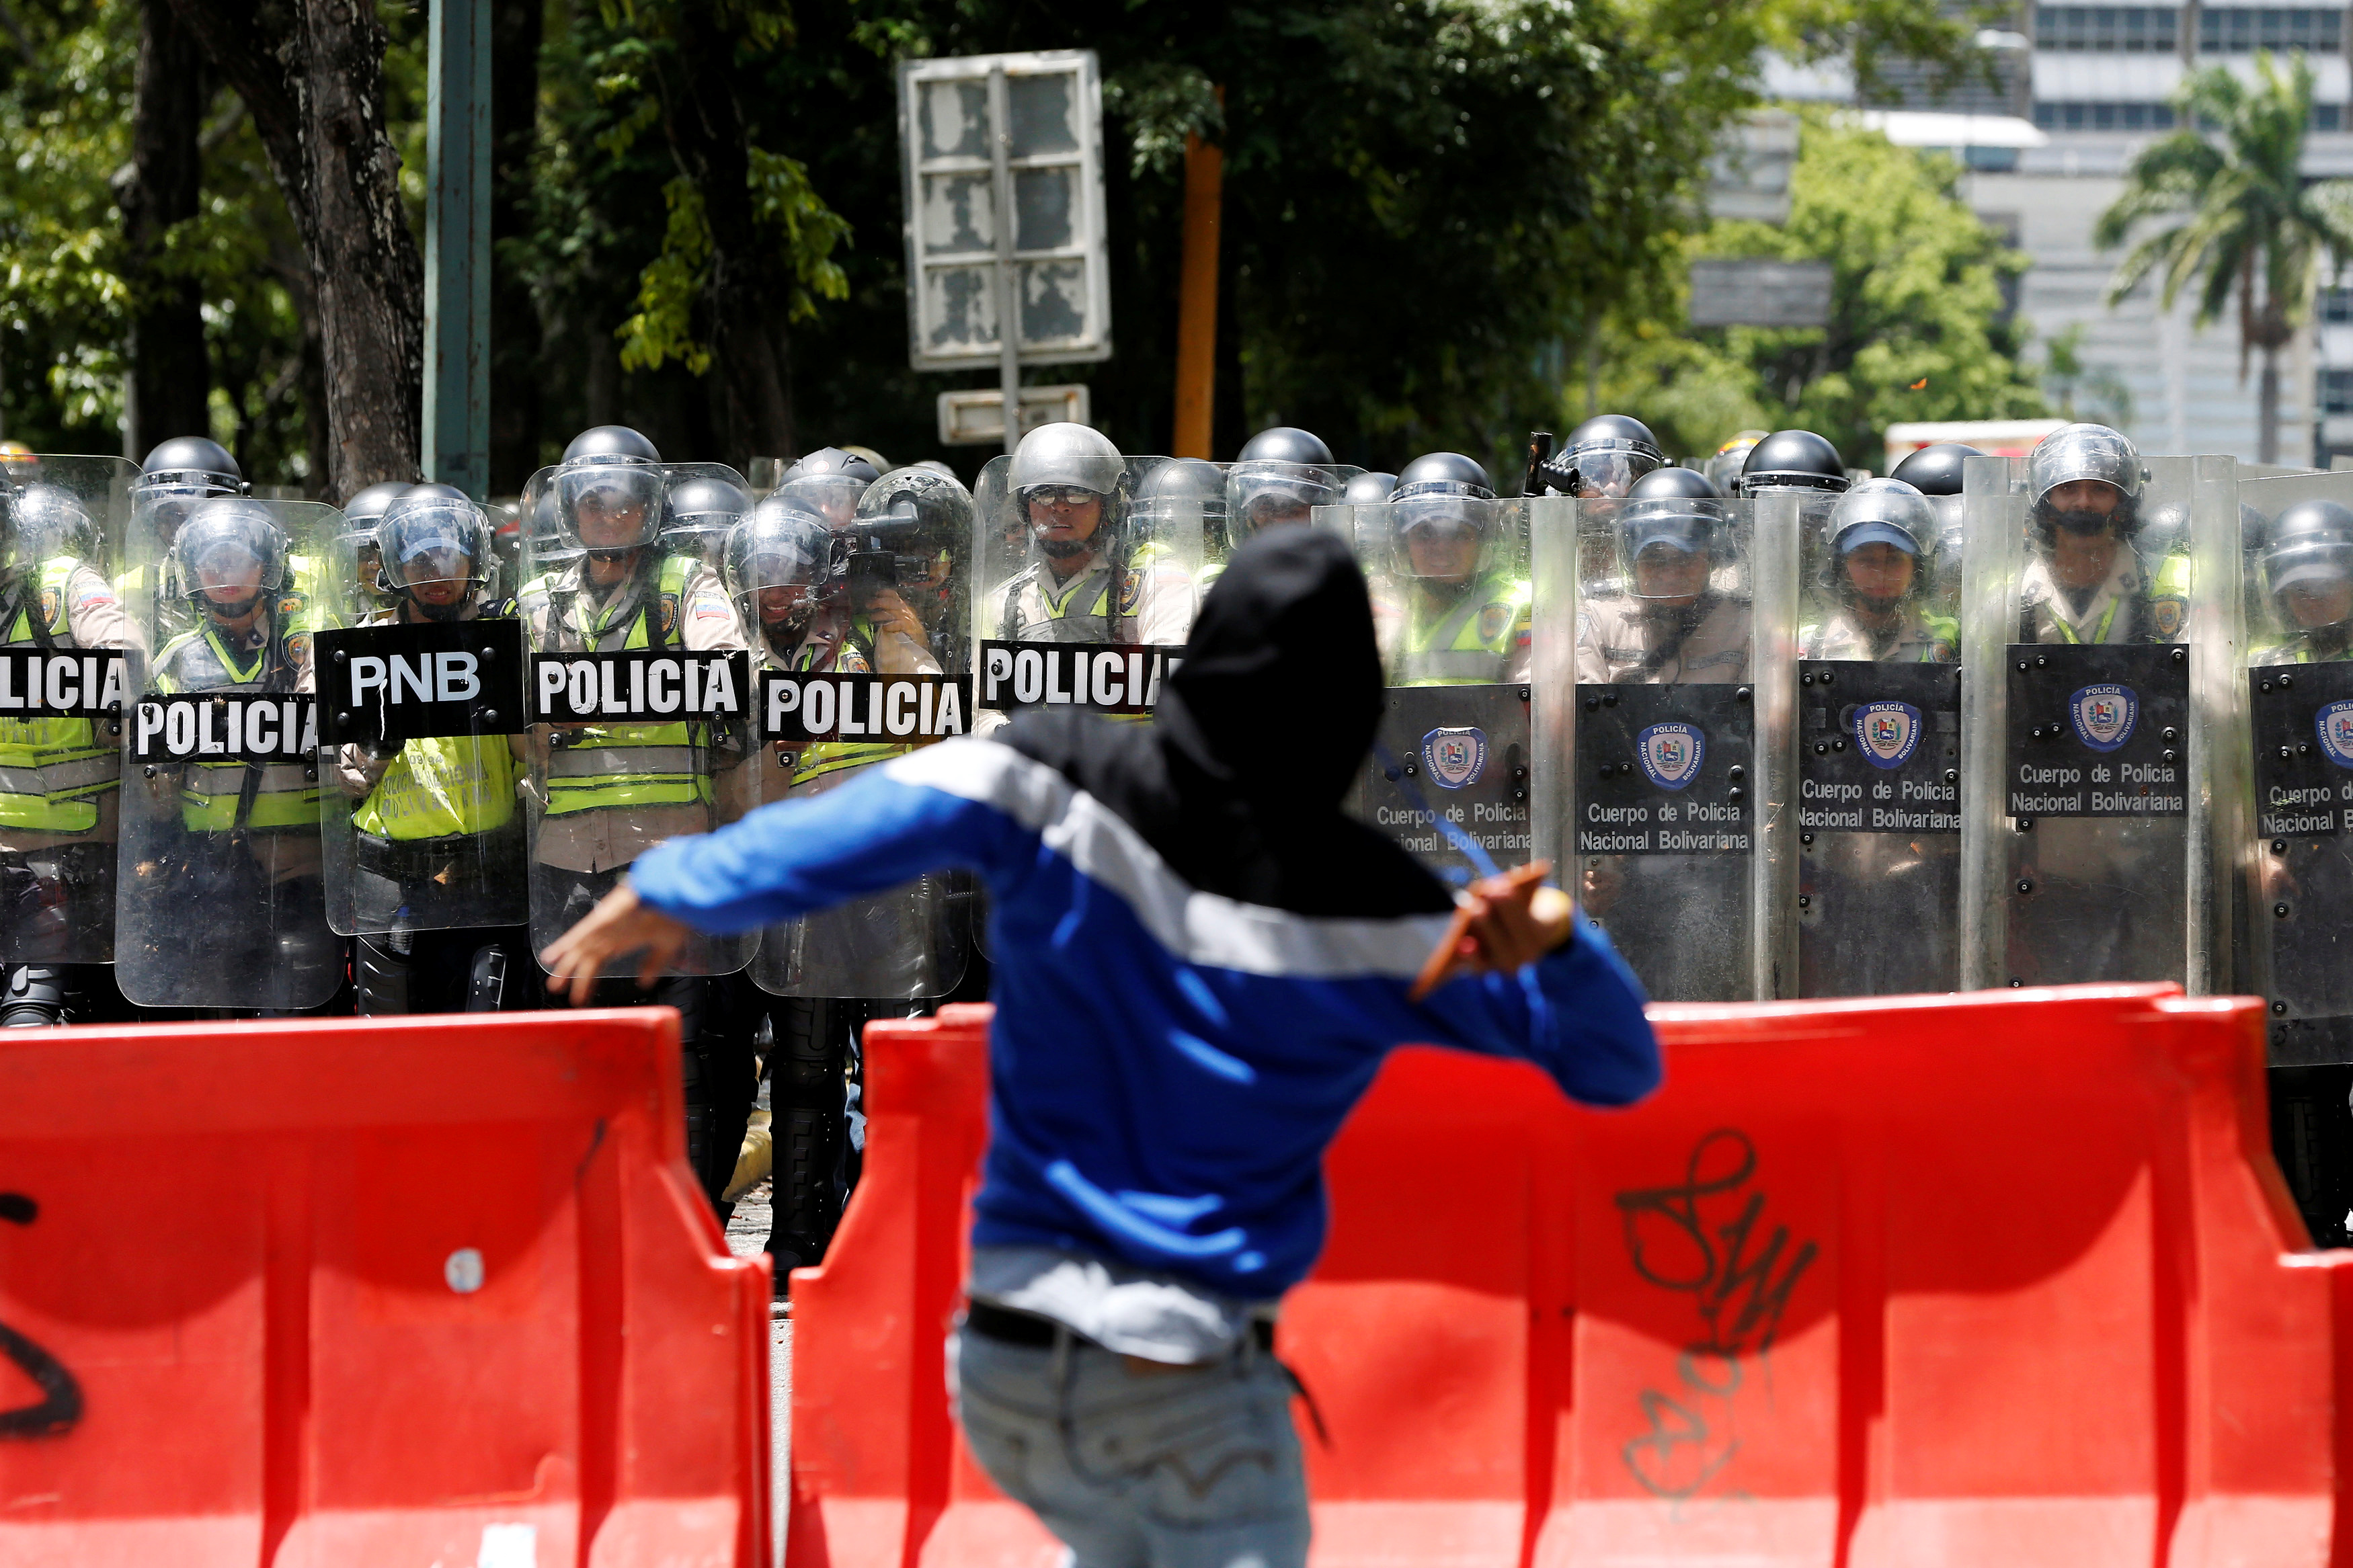 A demonstrator throws a stone at riot police officers during a student protest in Caracas, Venezuela.